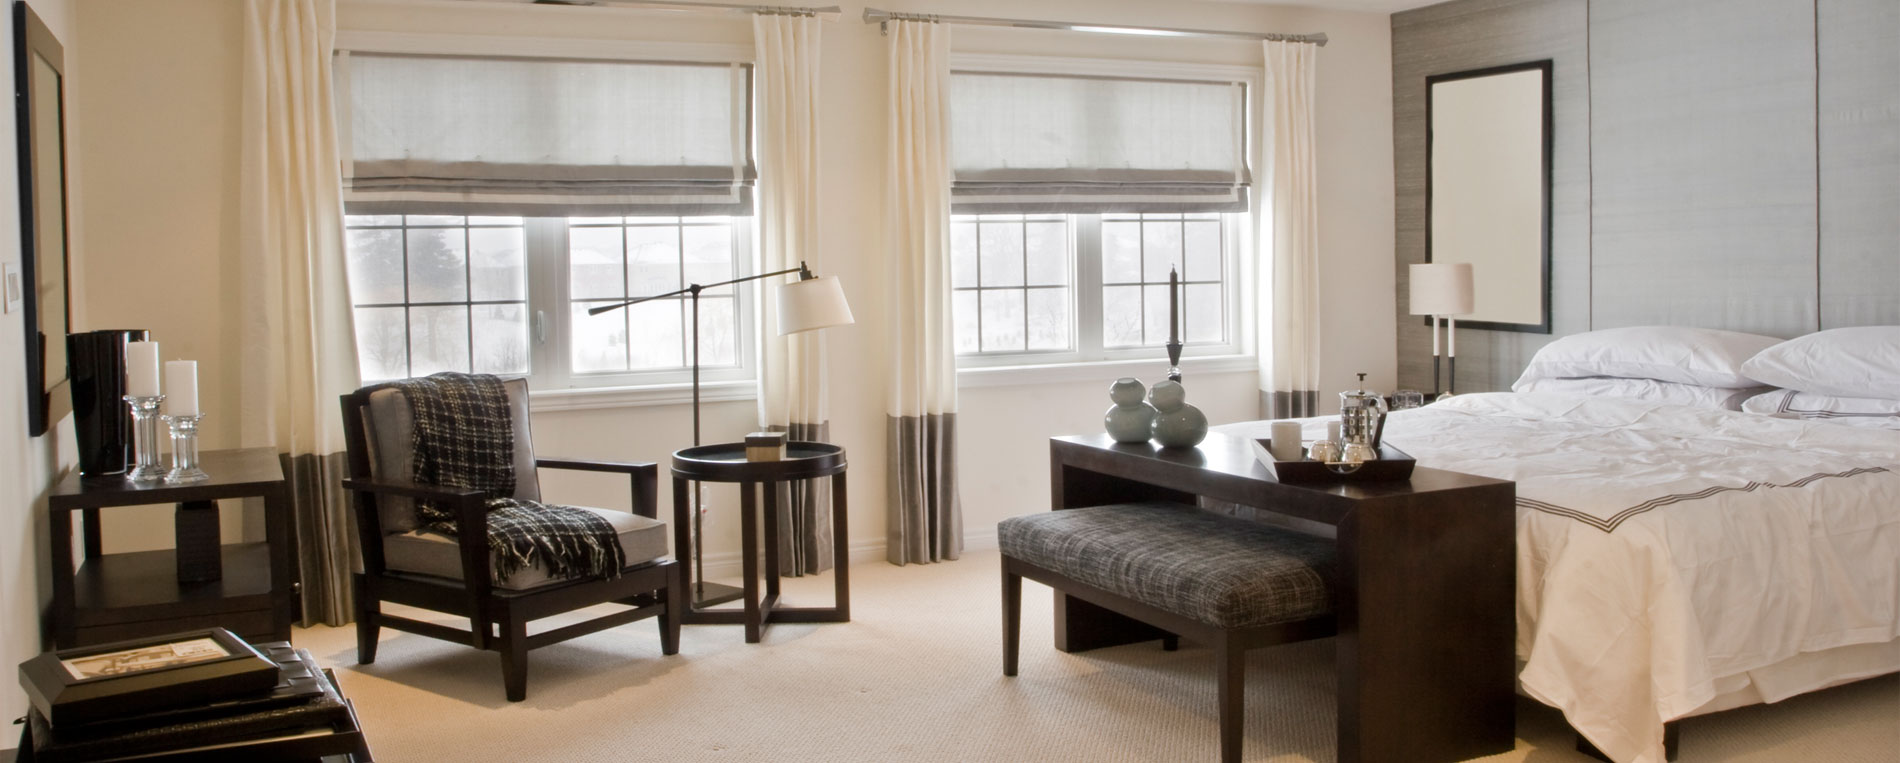 How to Clean Fabric Shades